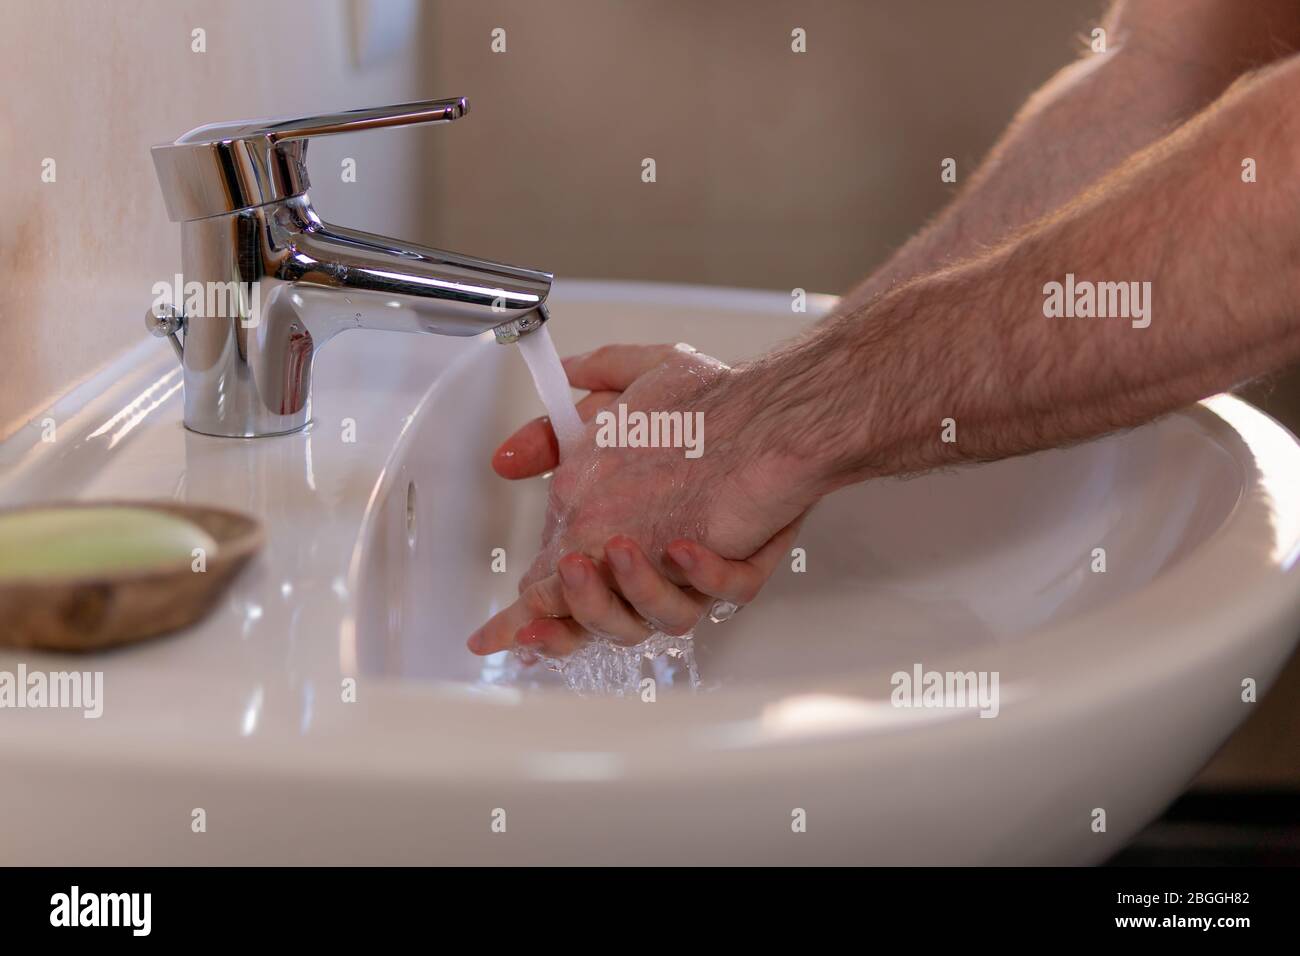 Caucasian man thoroughly washing hands in wash basin under water tap. Personal hygiene as coronavirus COVID-19 pandemic spread prevention. Stock Photo